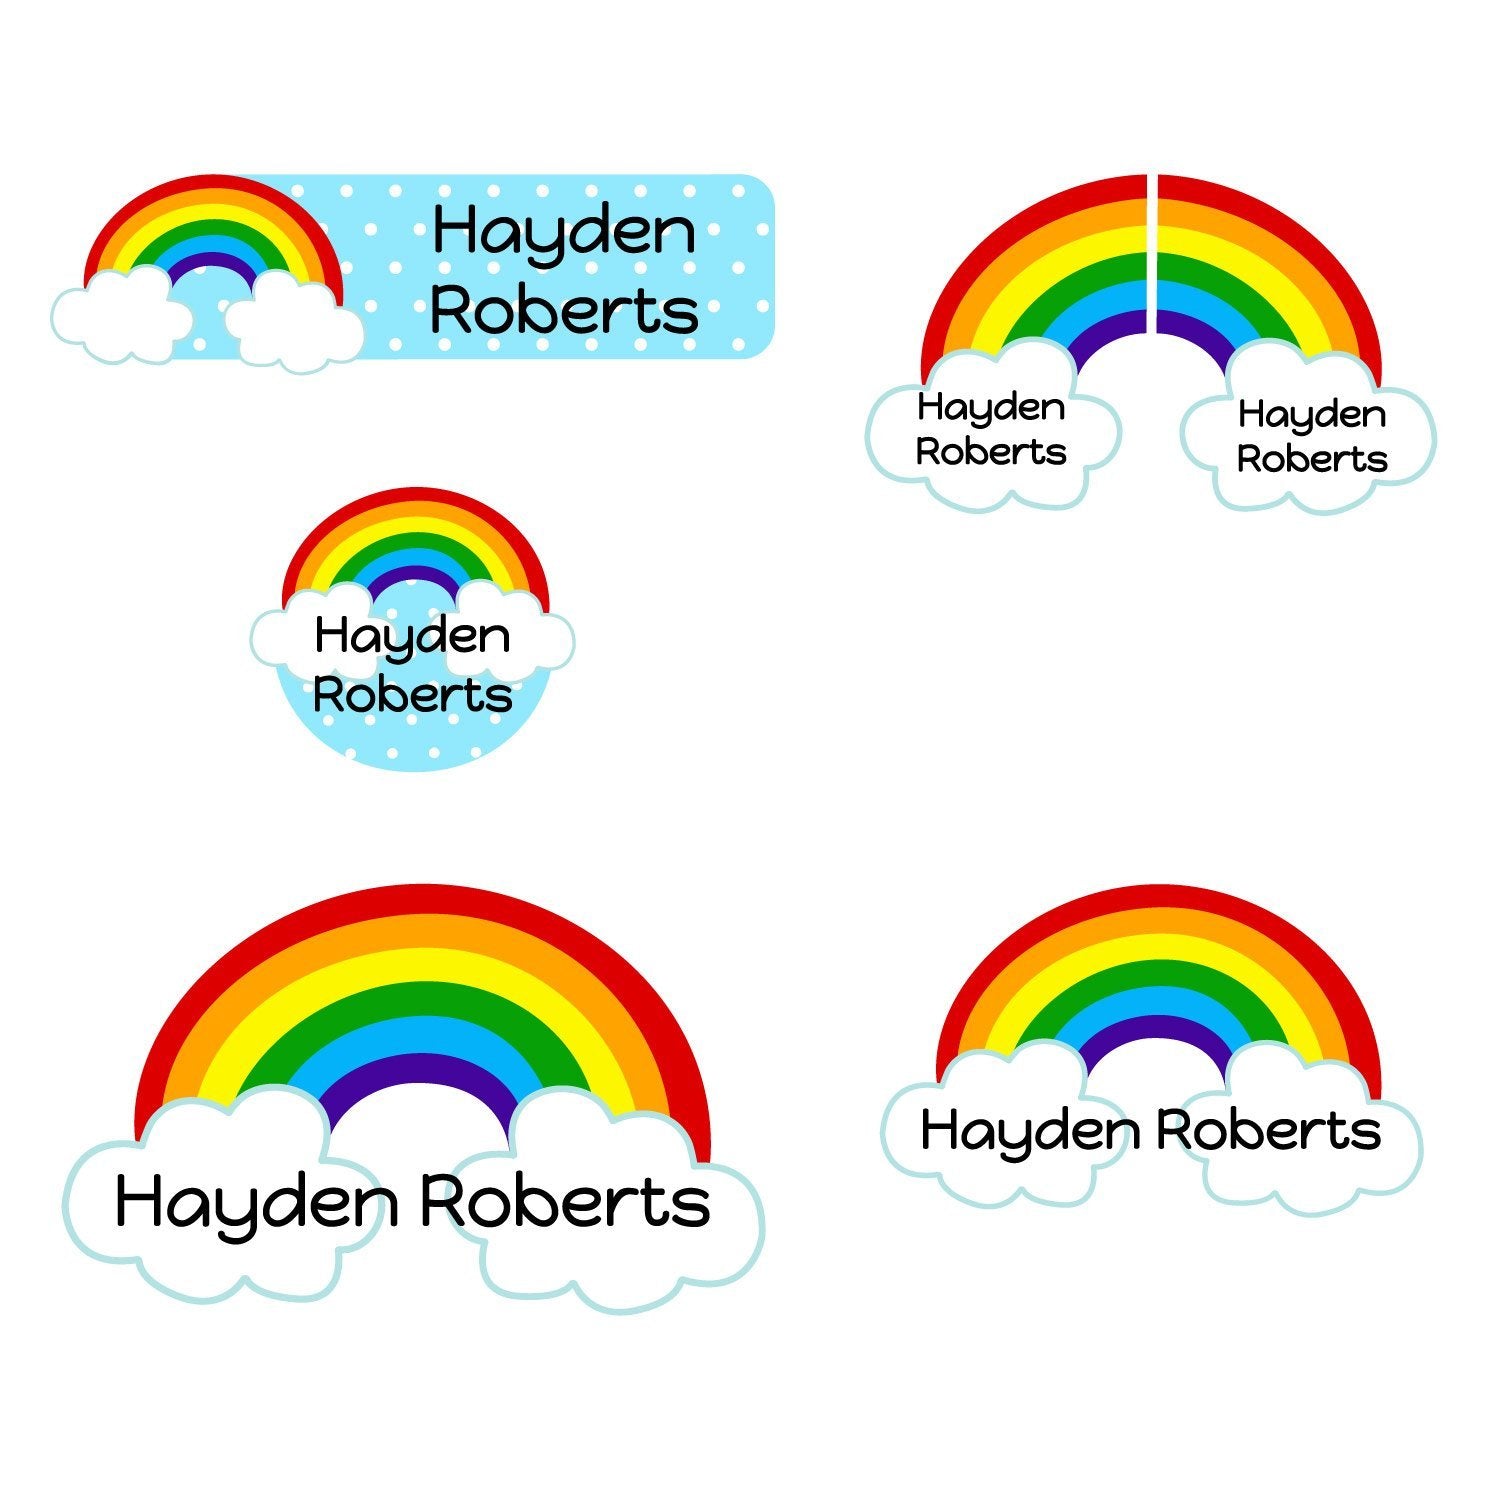 30 x Customized Name Labels | Perfect Kids Daycare and School Supplys Tag  Labels | Cute Children's Name Label Pack - Waterproof Safe